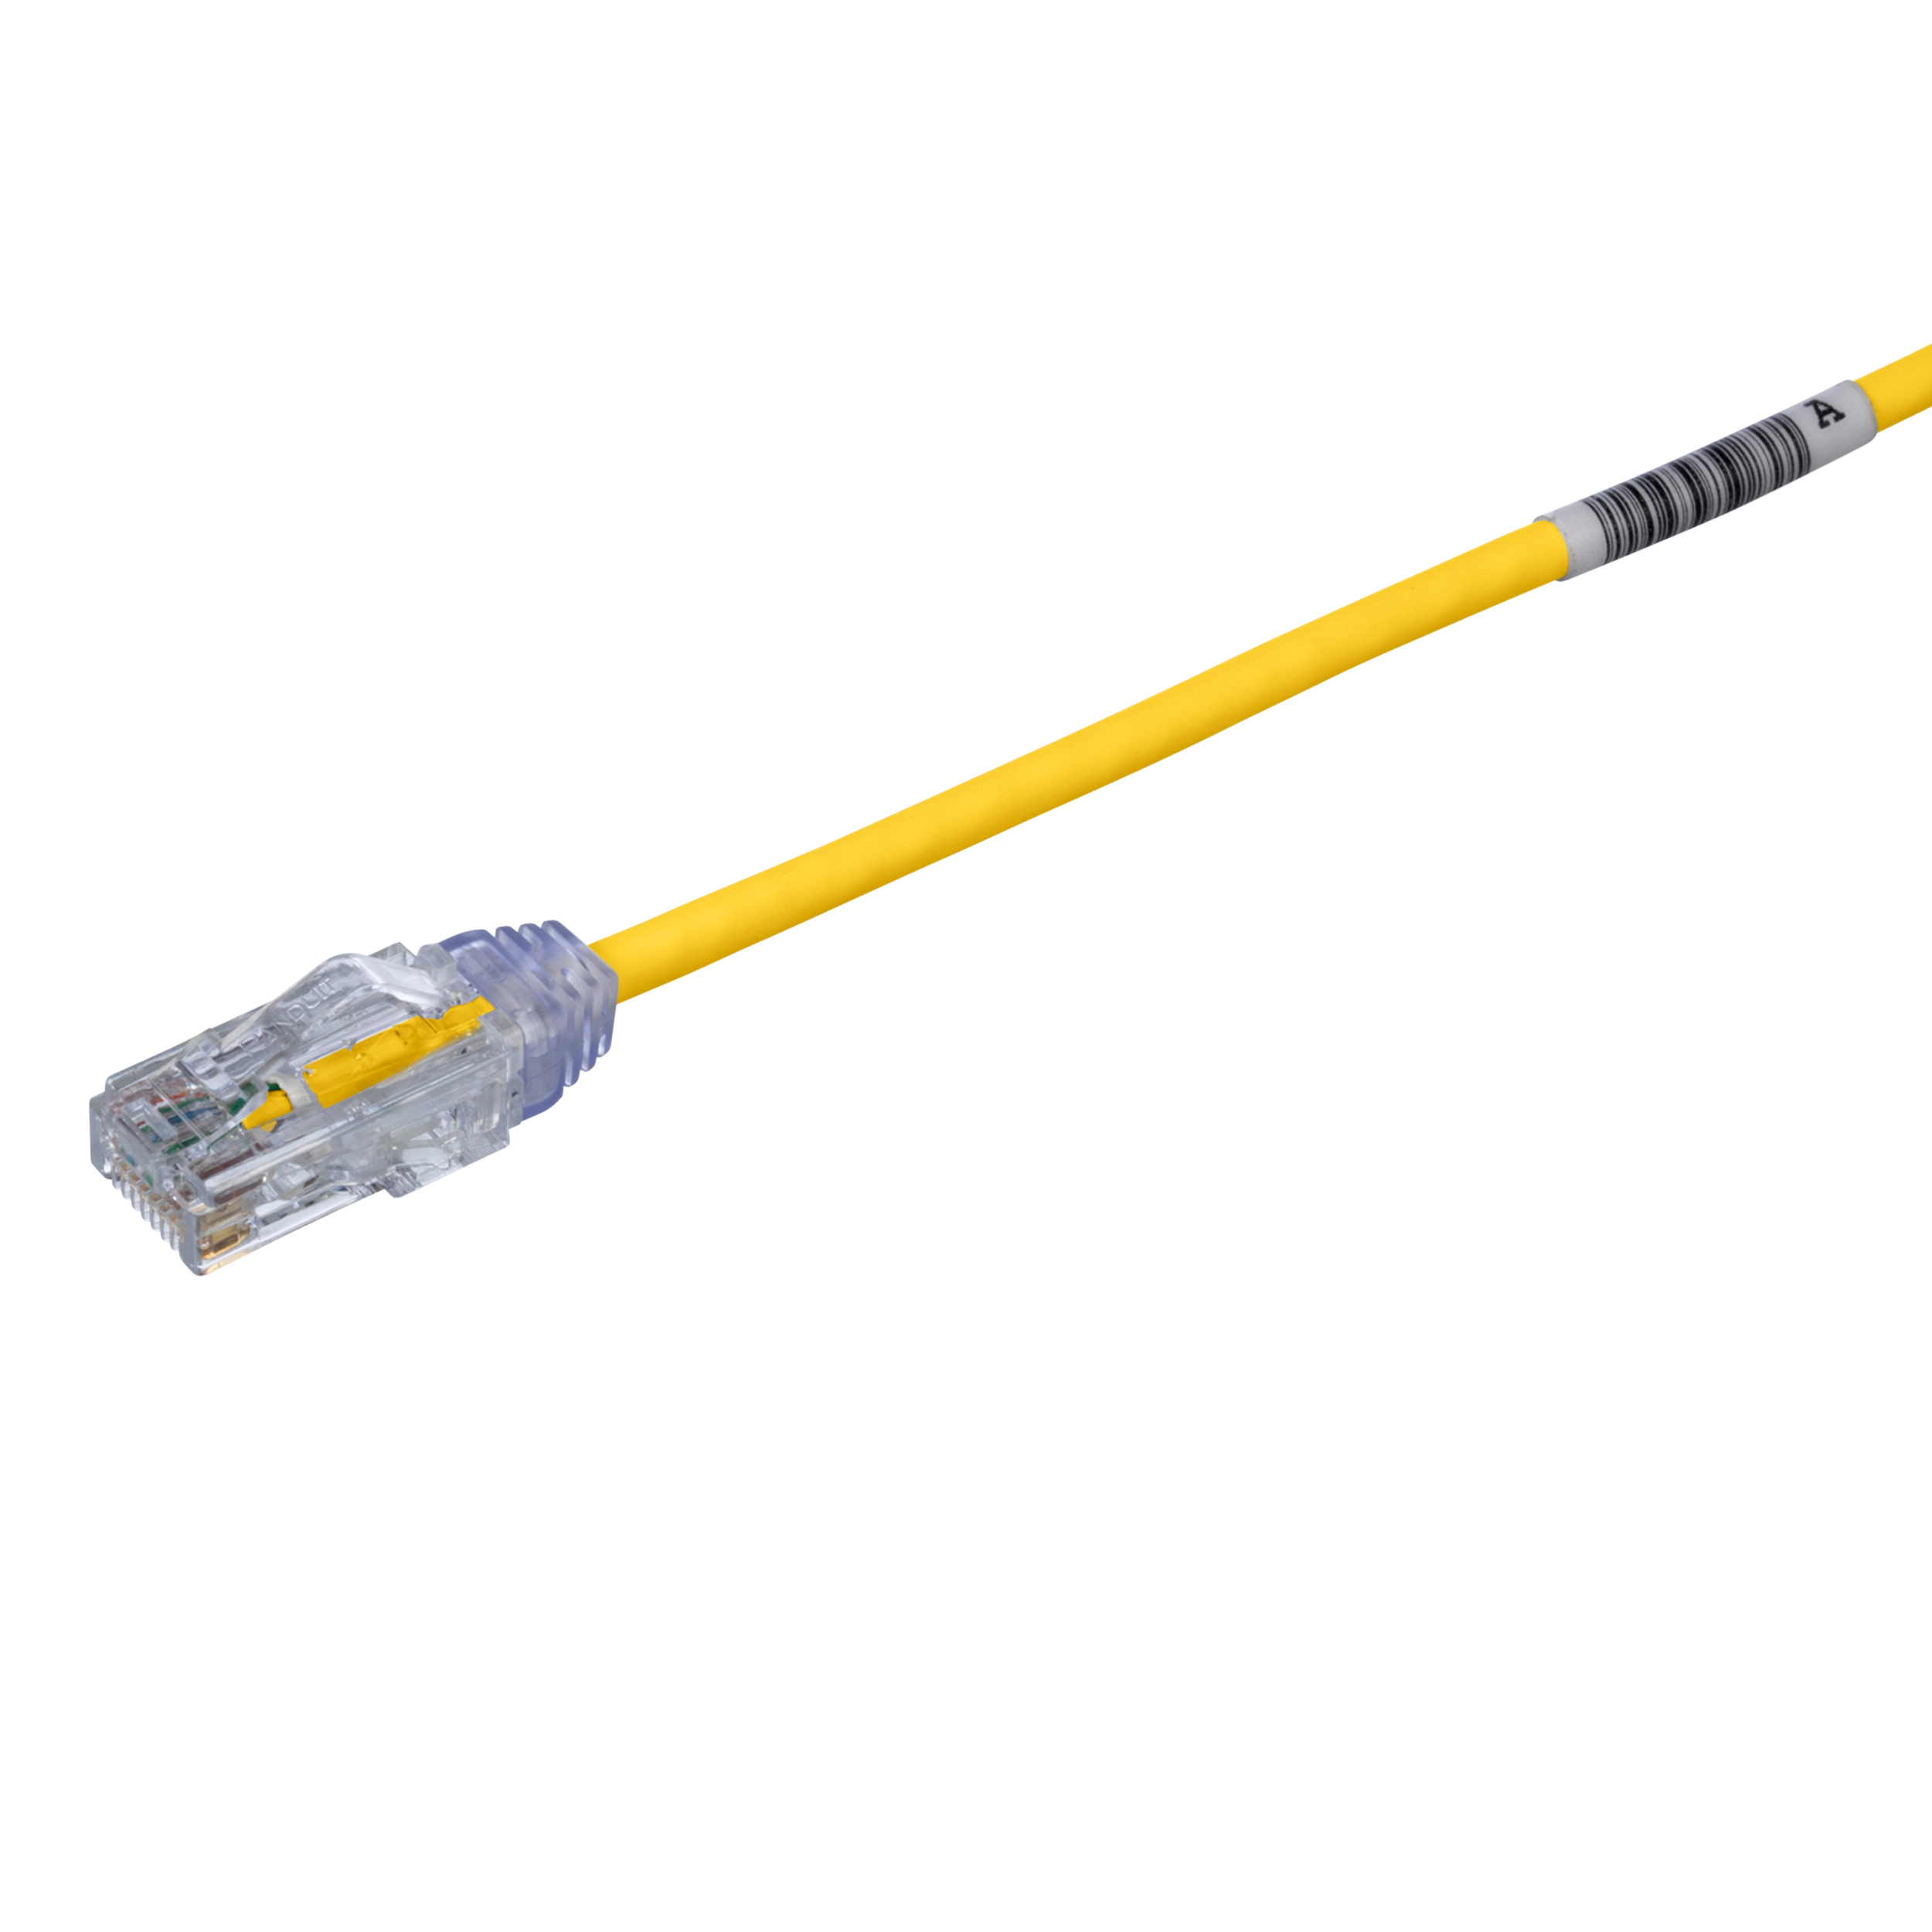 Cat 6 28 AWG UTP Copper Patch Cord, 30 ft, Yellow